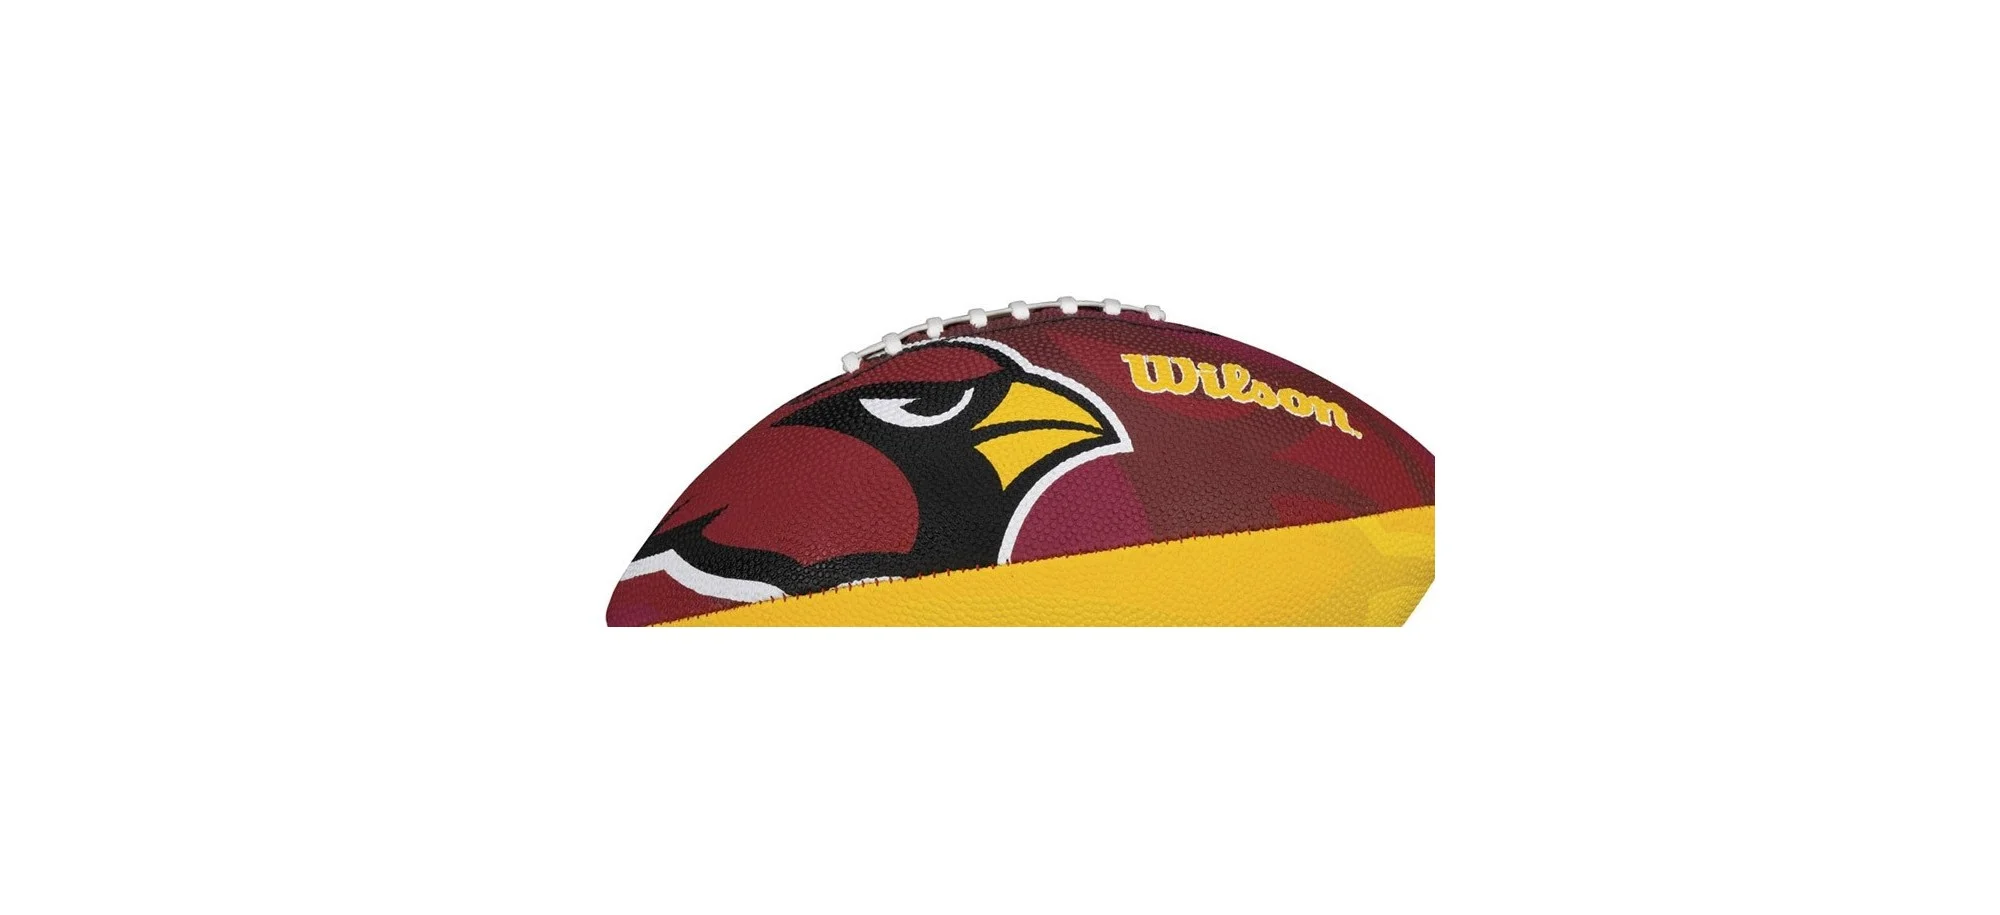 NFL footballs - Show your support with our NFL team logo footballs.